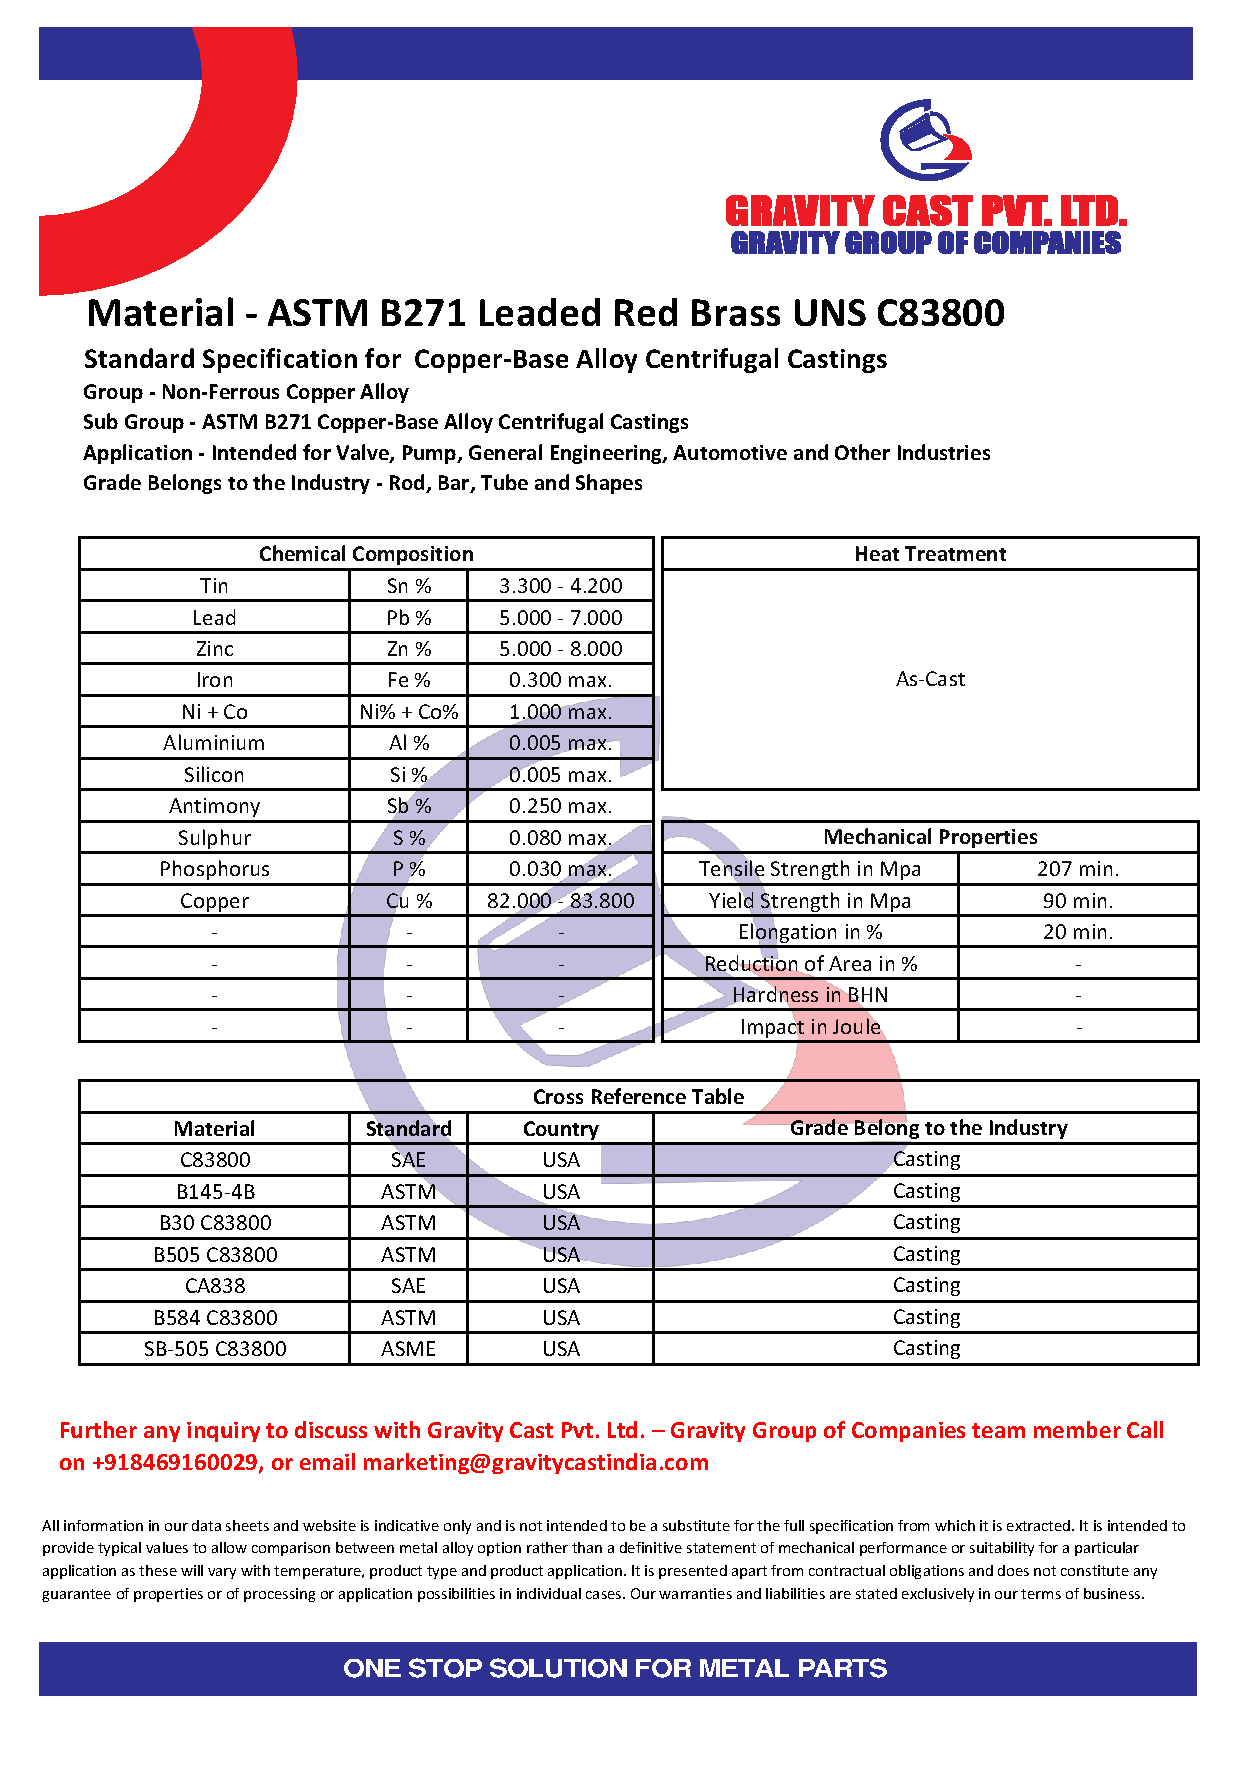 ASTM B271 Leaded Red Brass UNS C83800.pdf